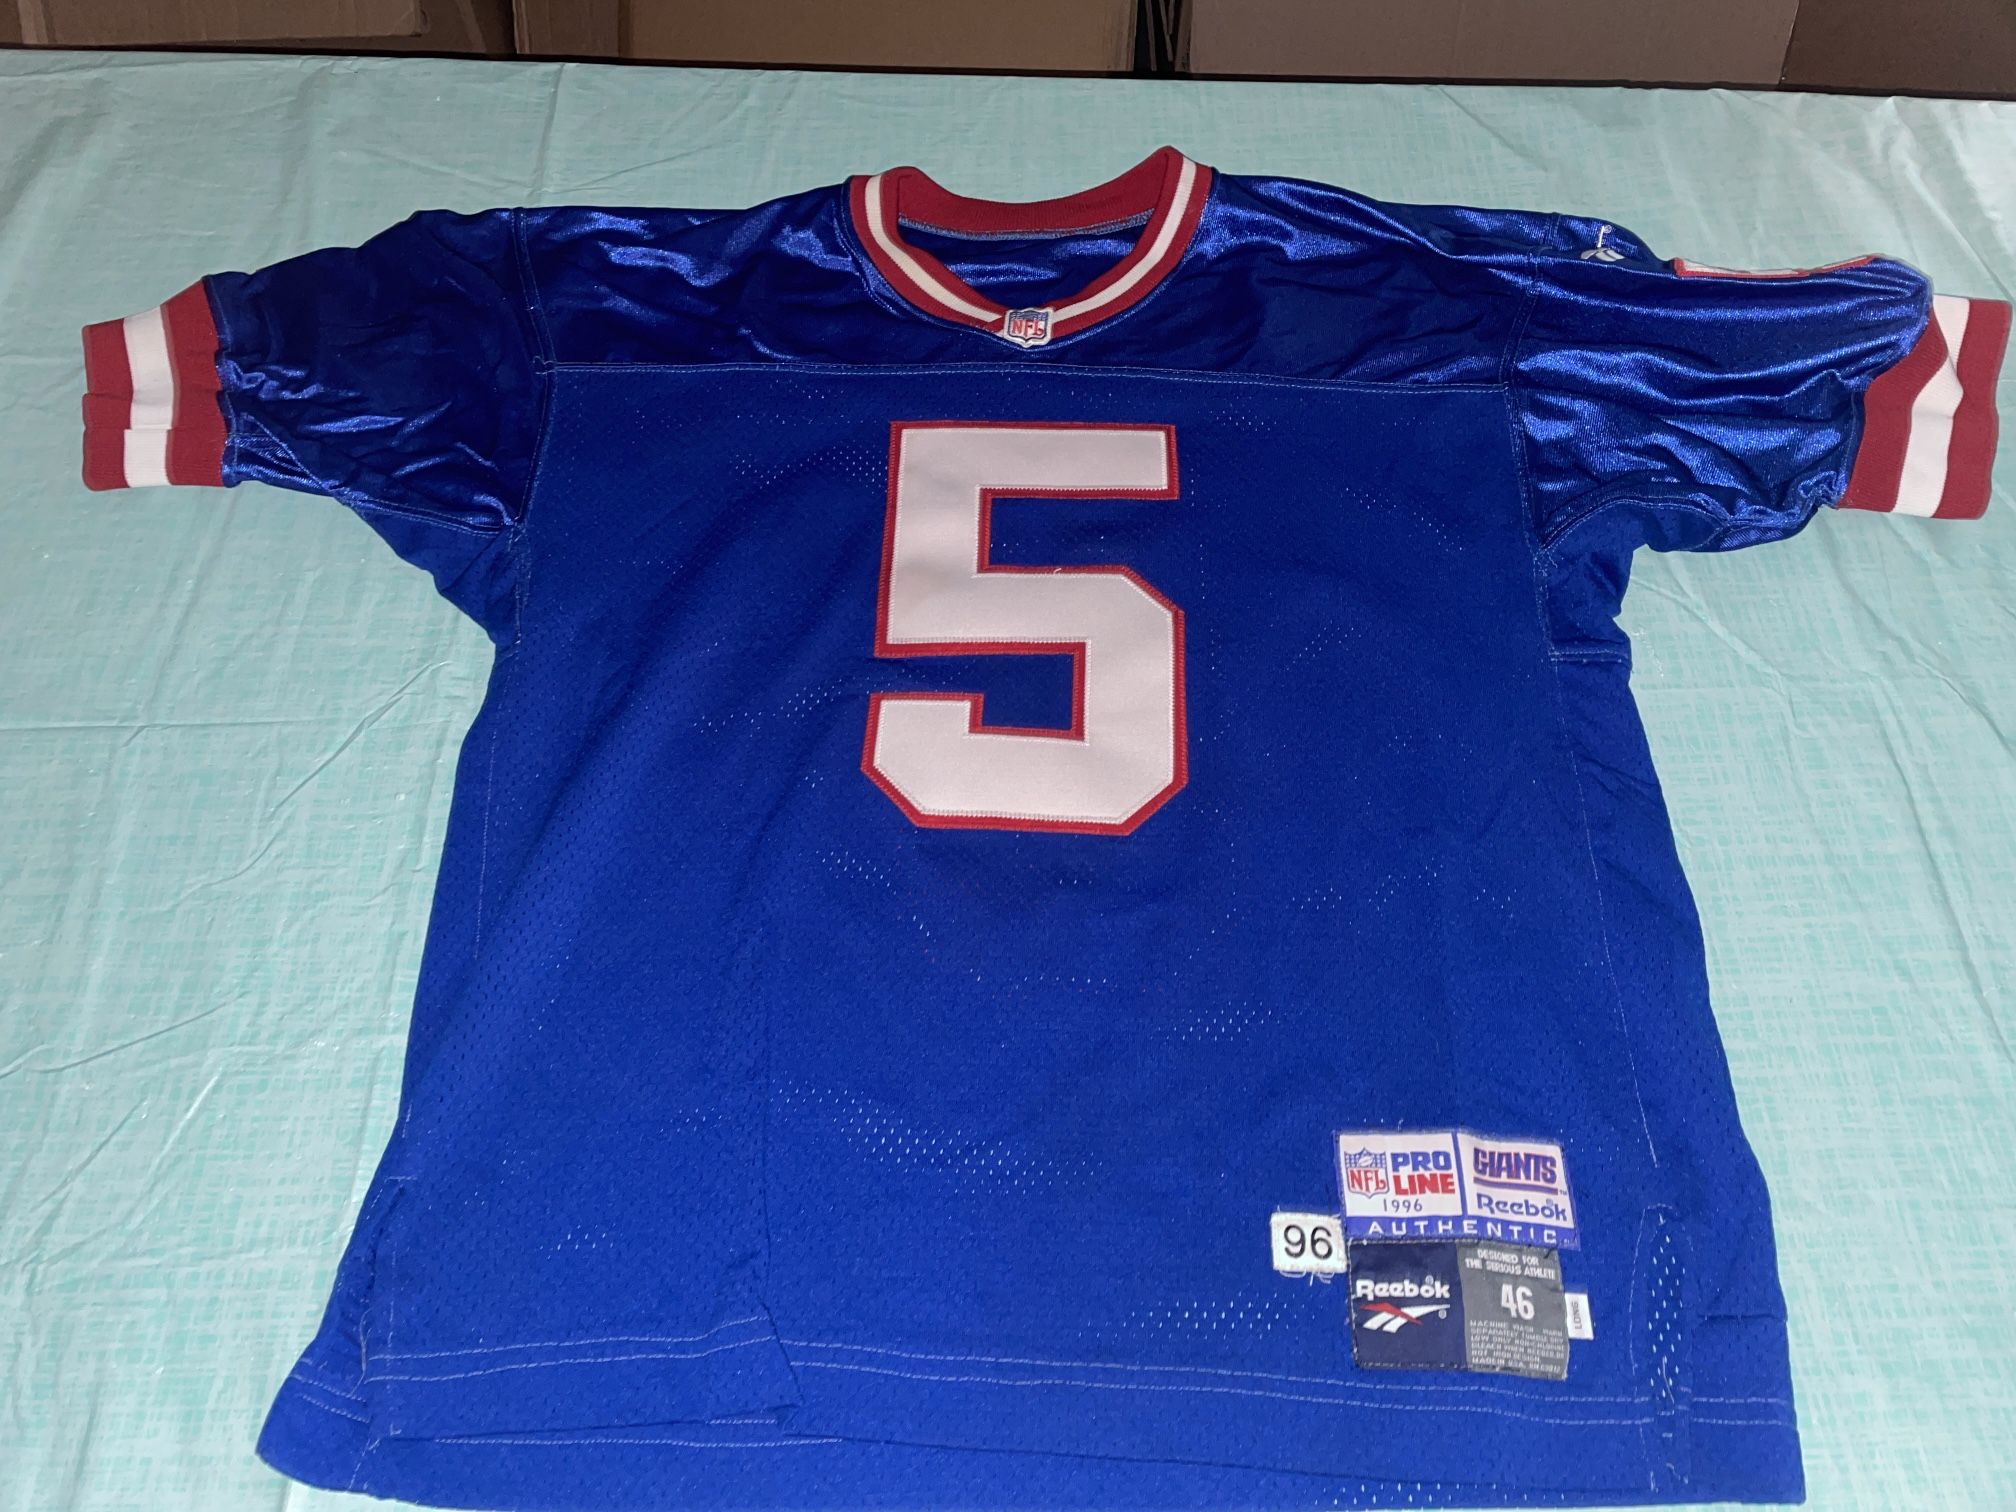 Adult 96 46 Long Ny Giants NFL Reebok Team Game Issued Jersey Blue #5